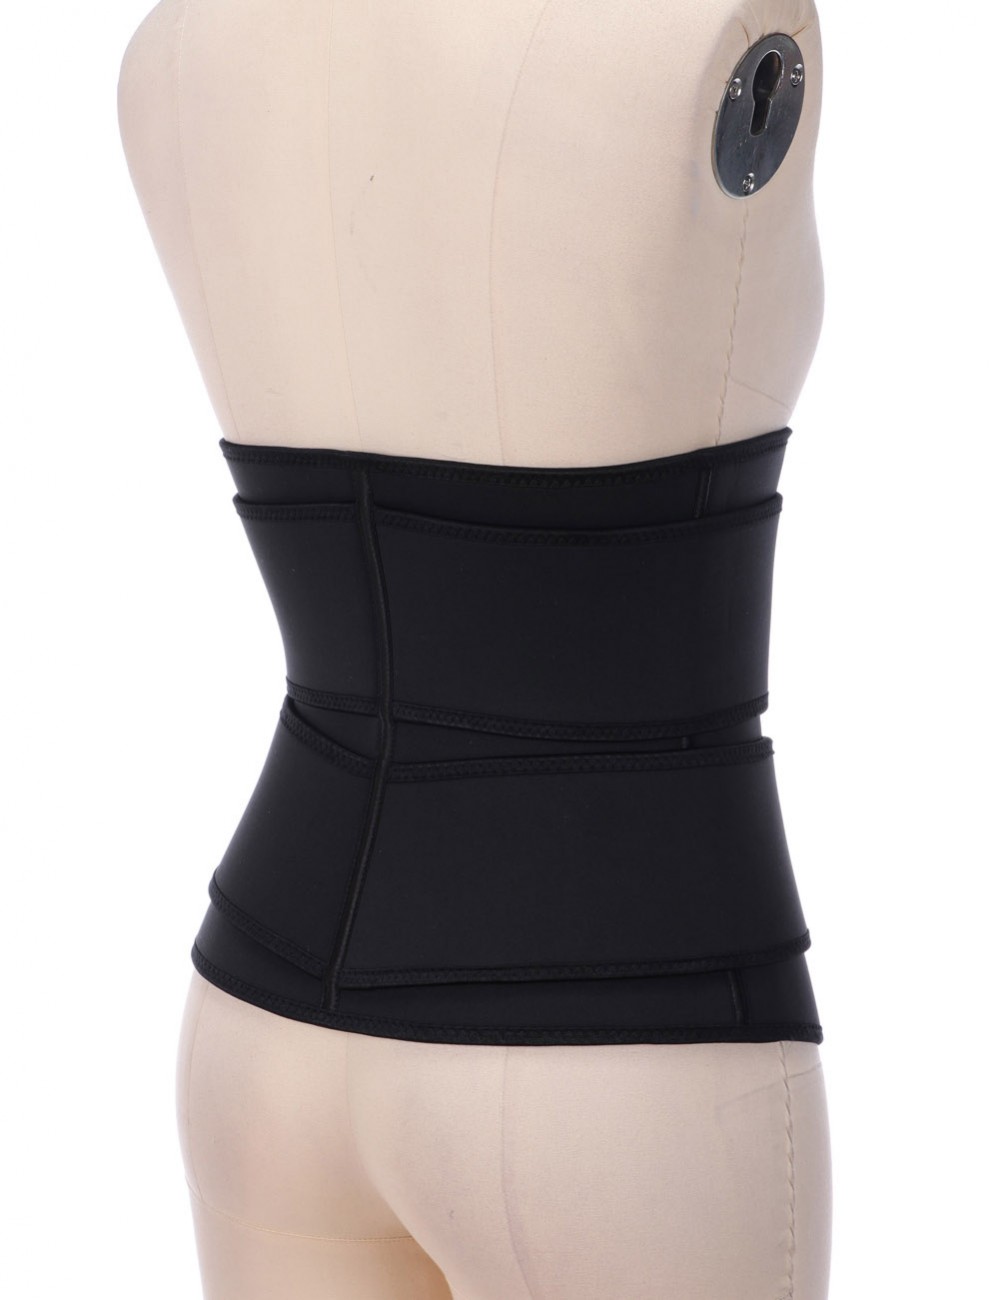 Double Belt Black Big Size Latex Waist Trainer For Loss Weight